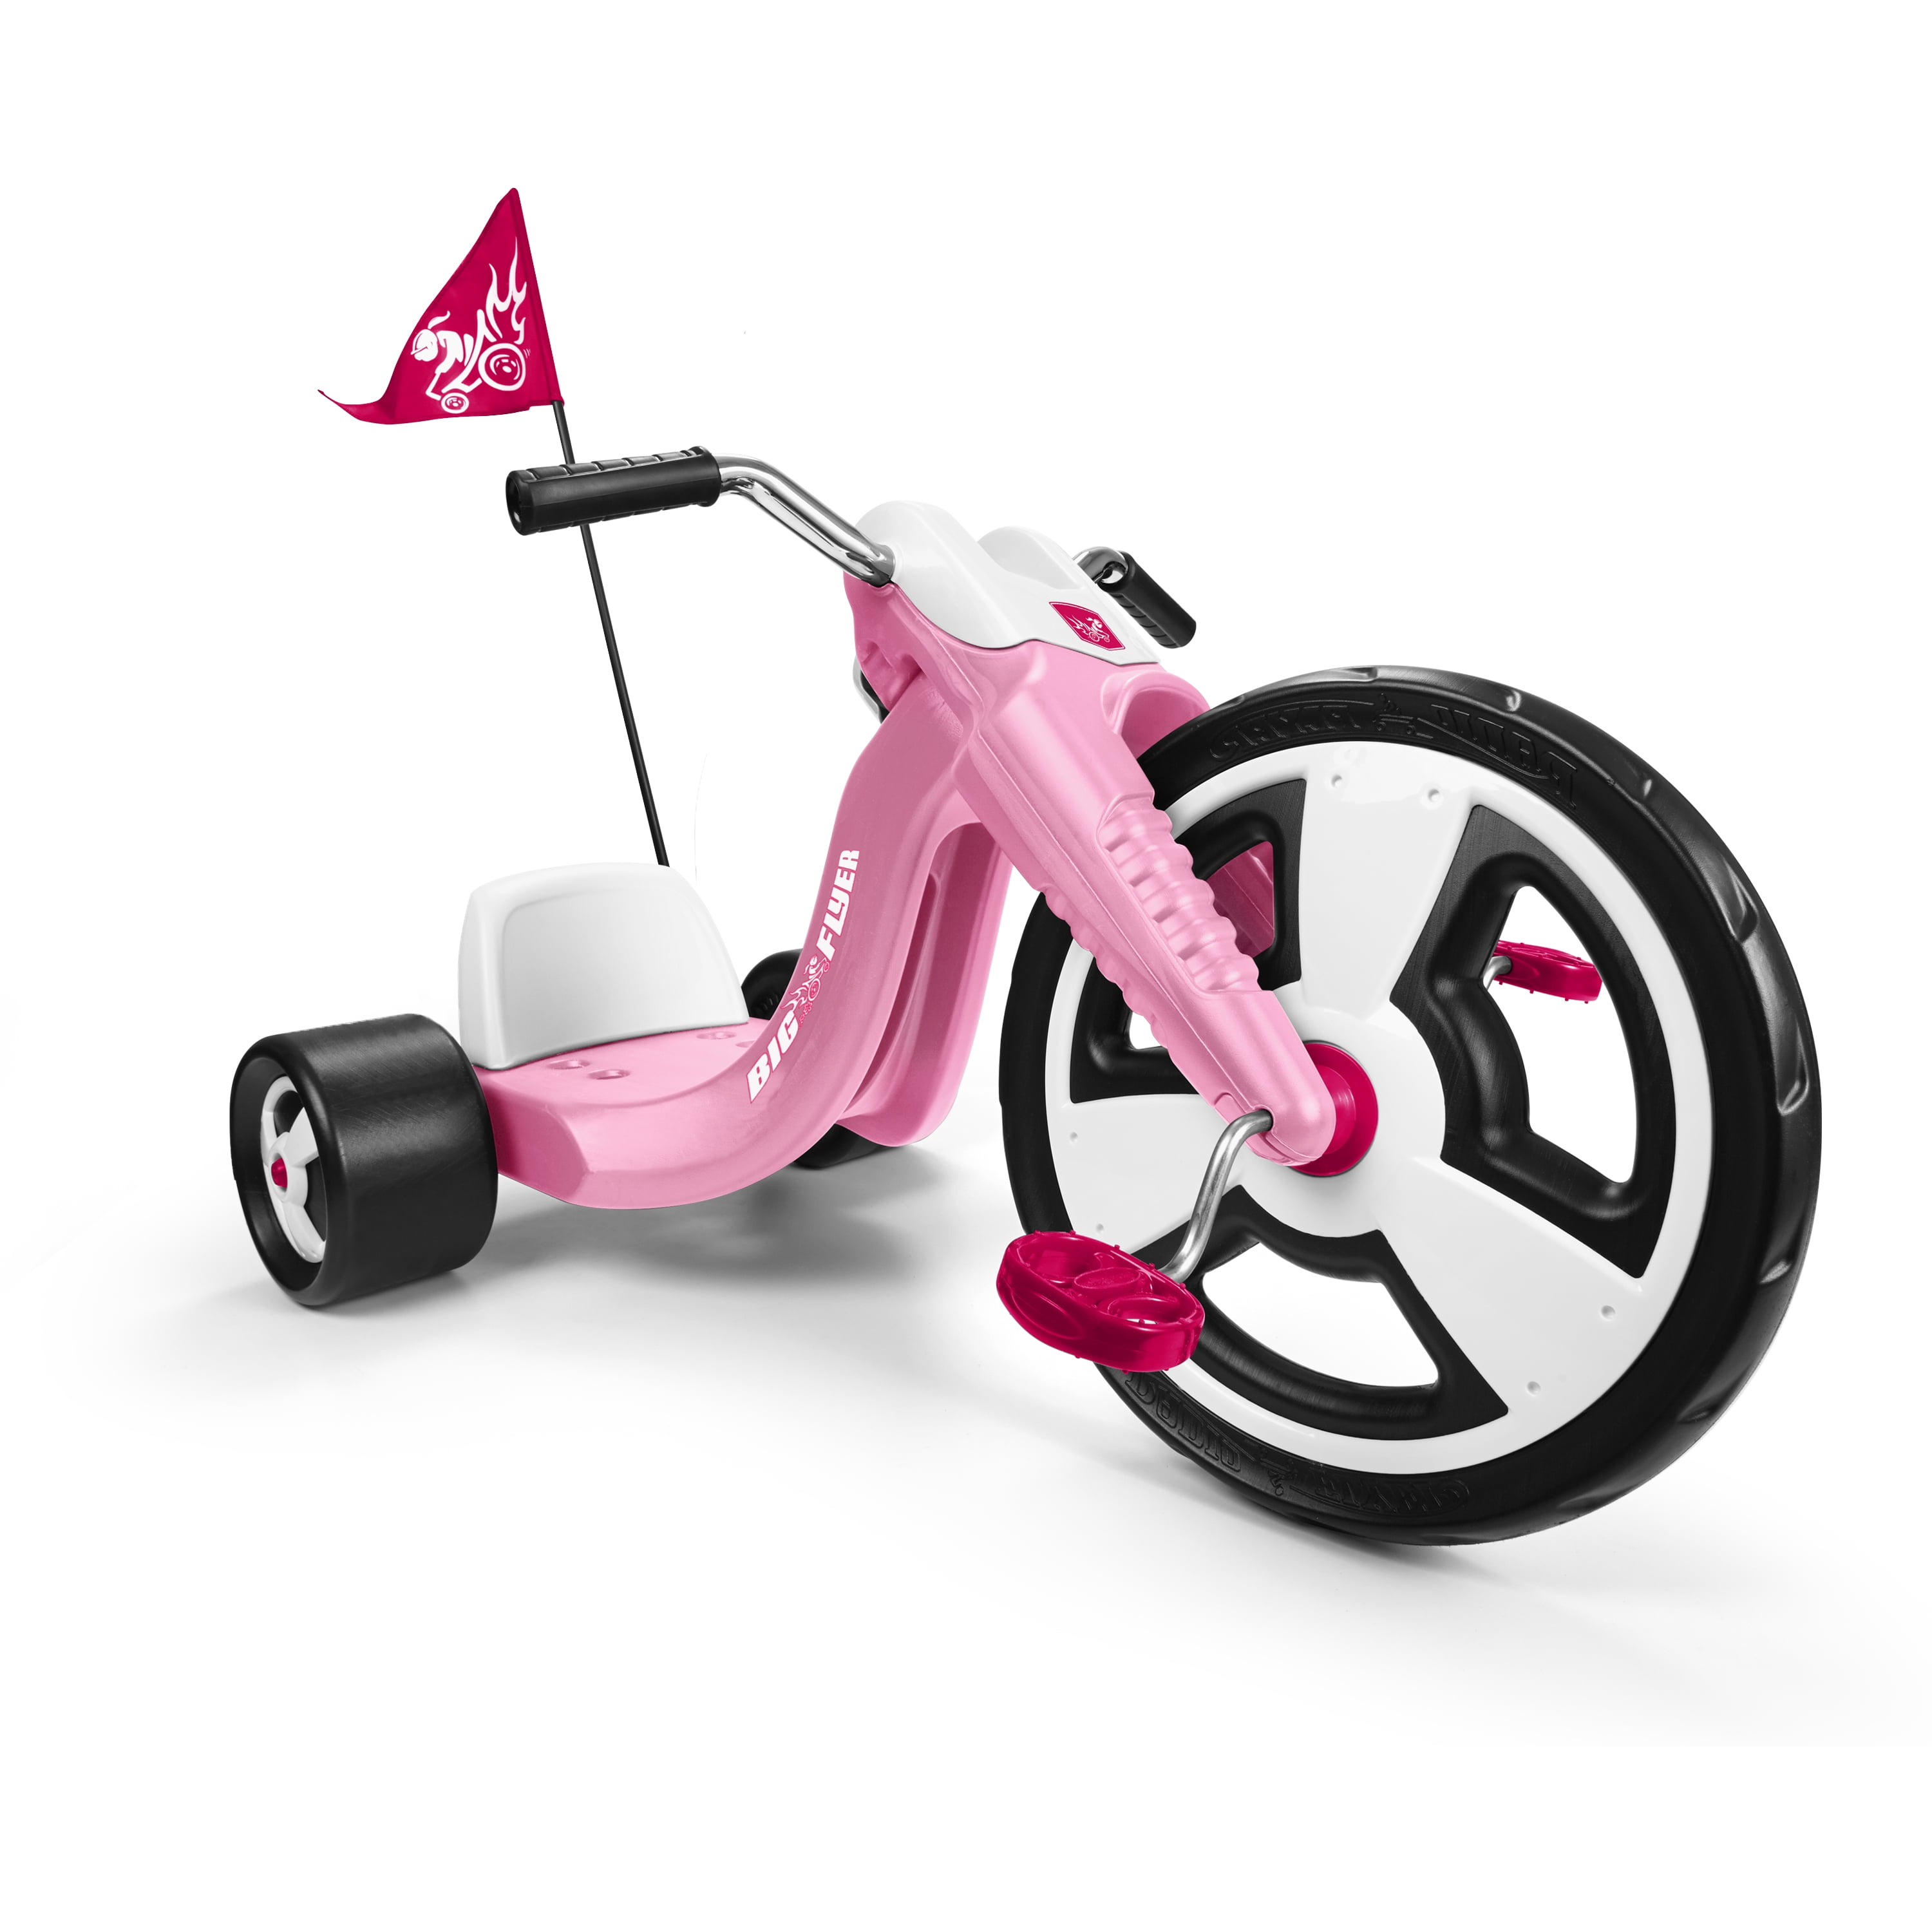 Kids Big Flyer Chopper Tricycle 16 Front Wheel Adjustable Seat Sports Toy Pink 